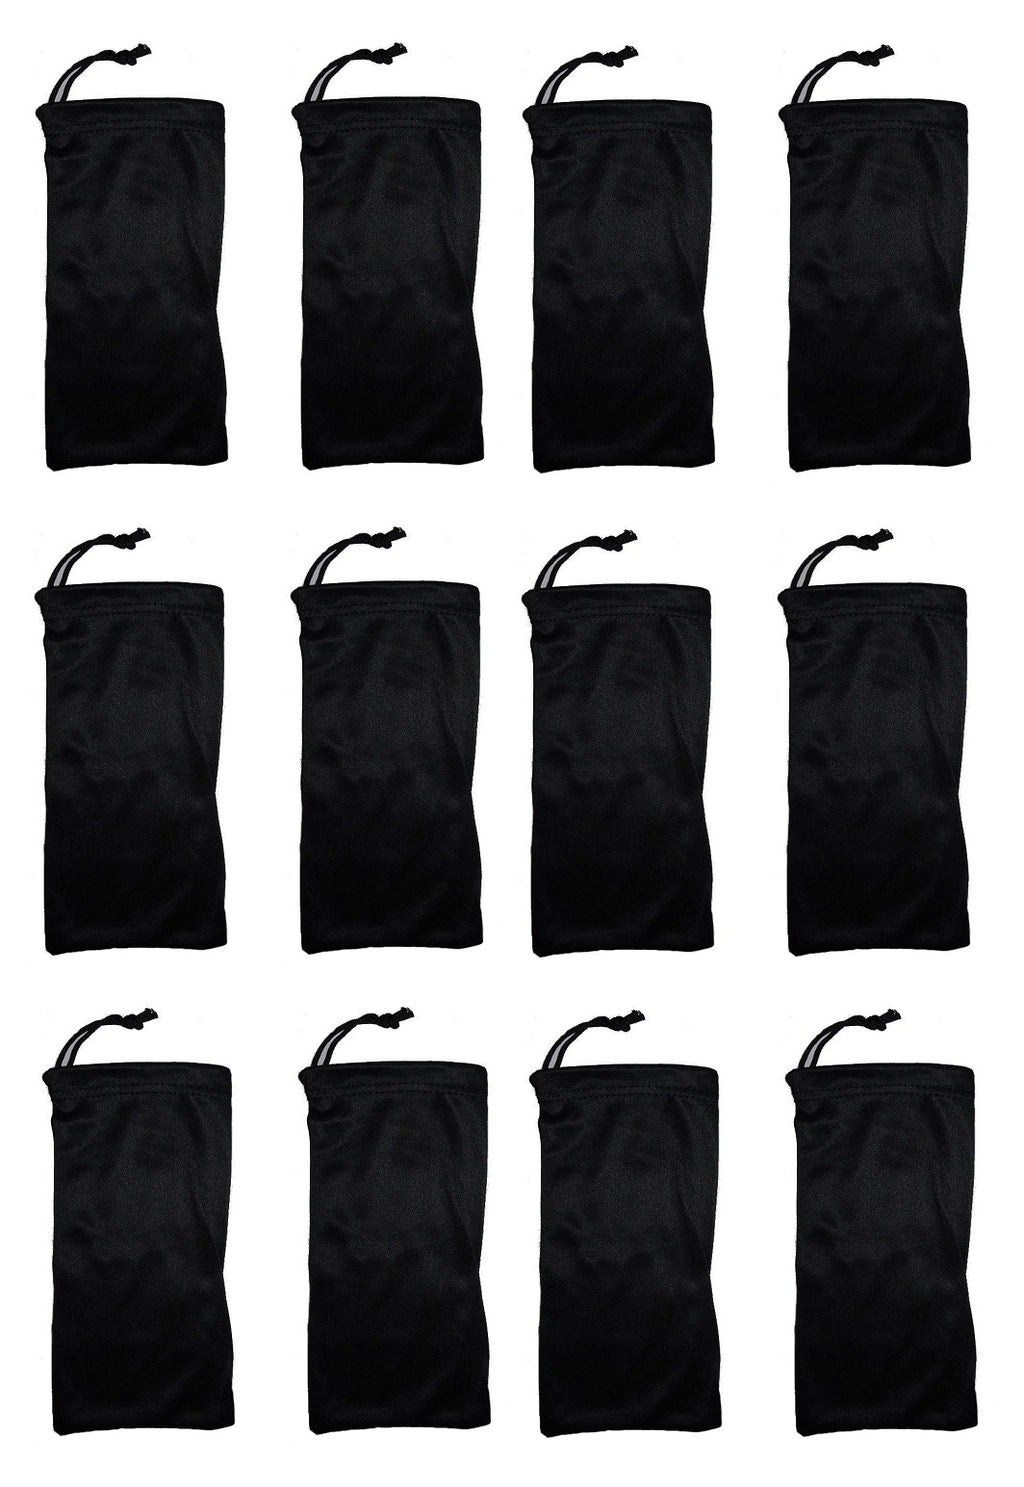 TRONWIRE 12-Pack Black Premium Soft Microfiber Cleaning Storage Pouch –